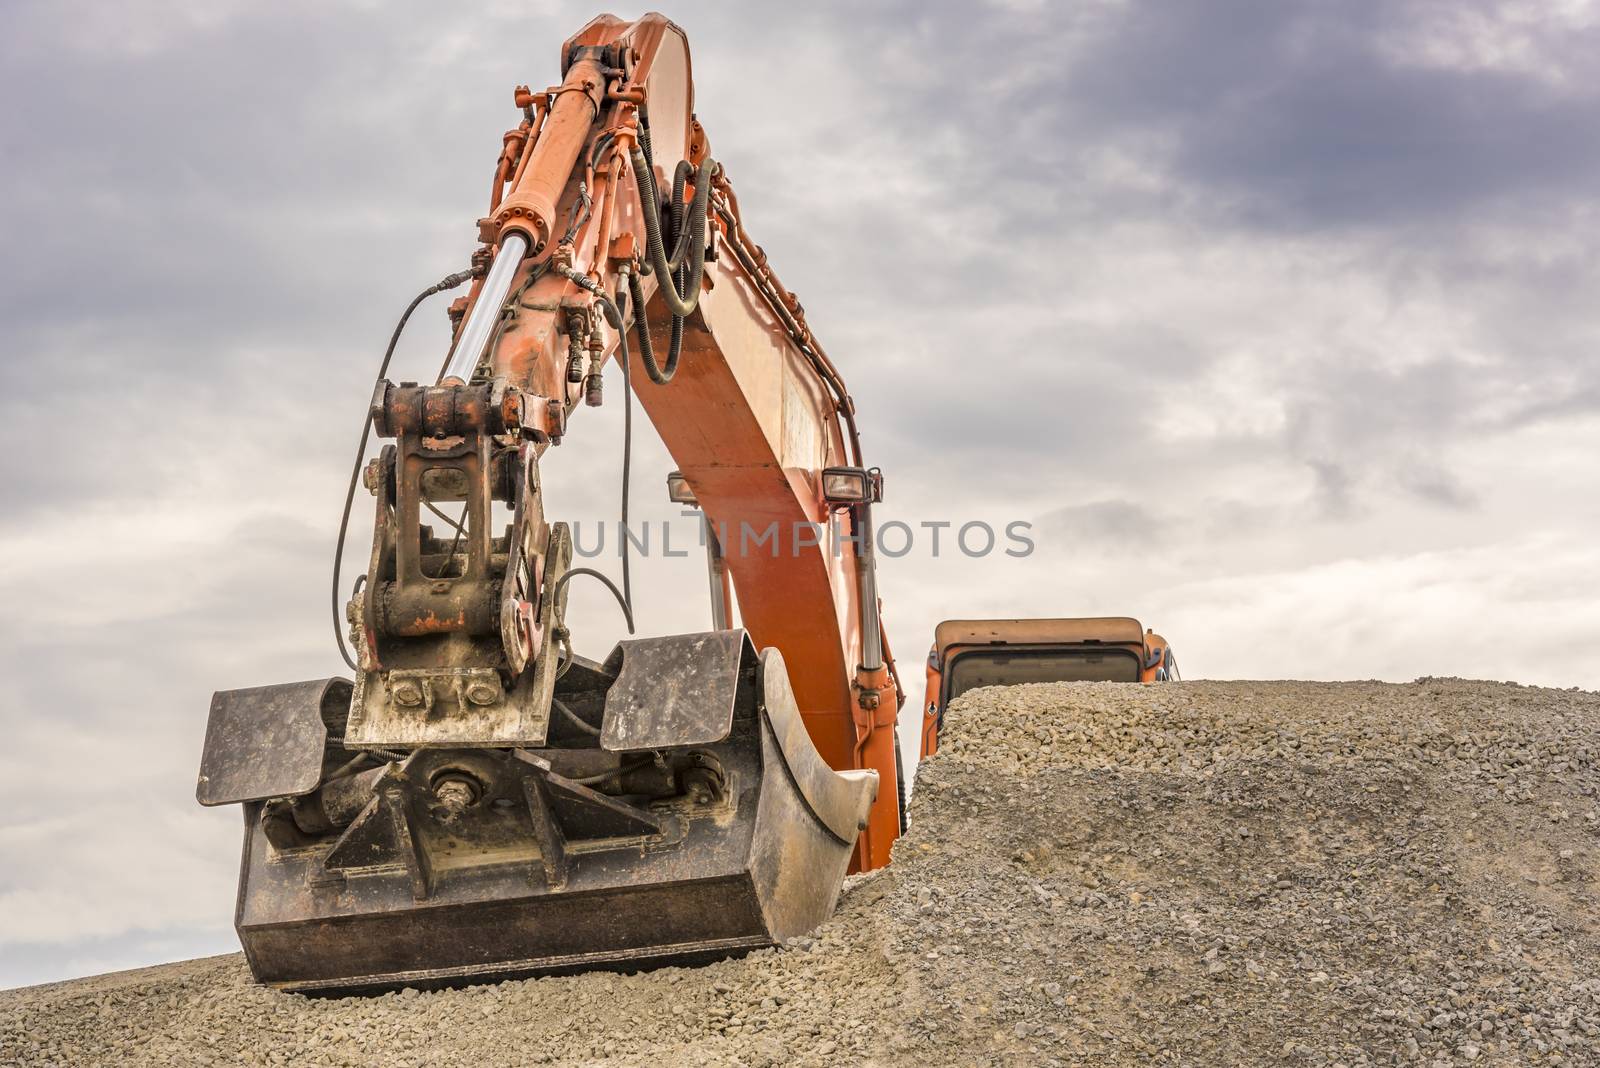 Frontal close up with the bucket and arm from a big orange excavator